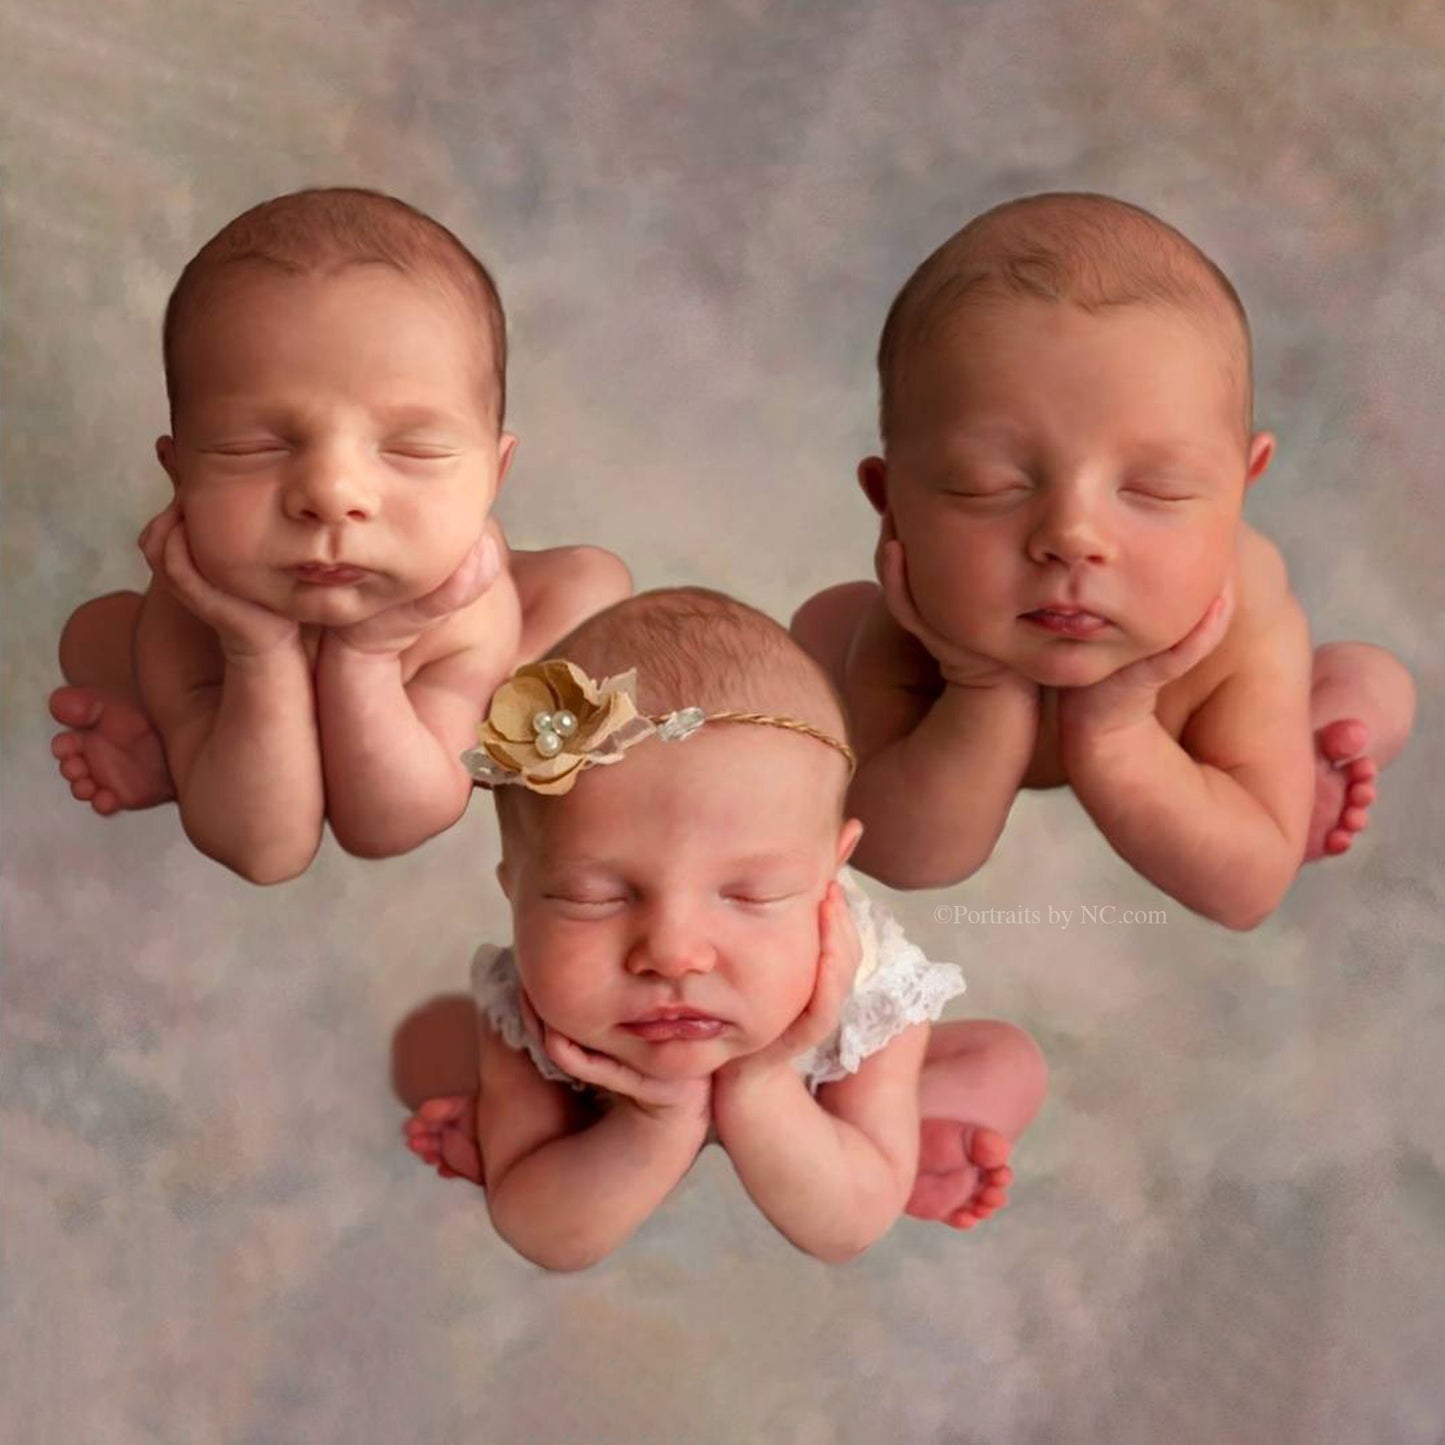 Painted Portrait of three babies